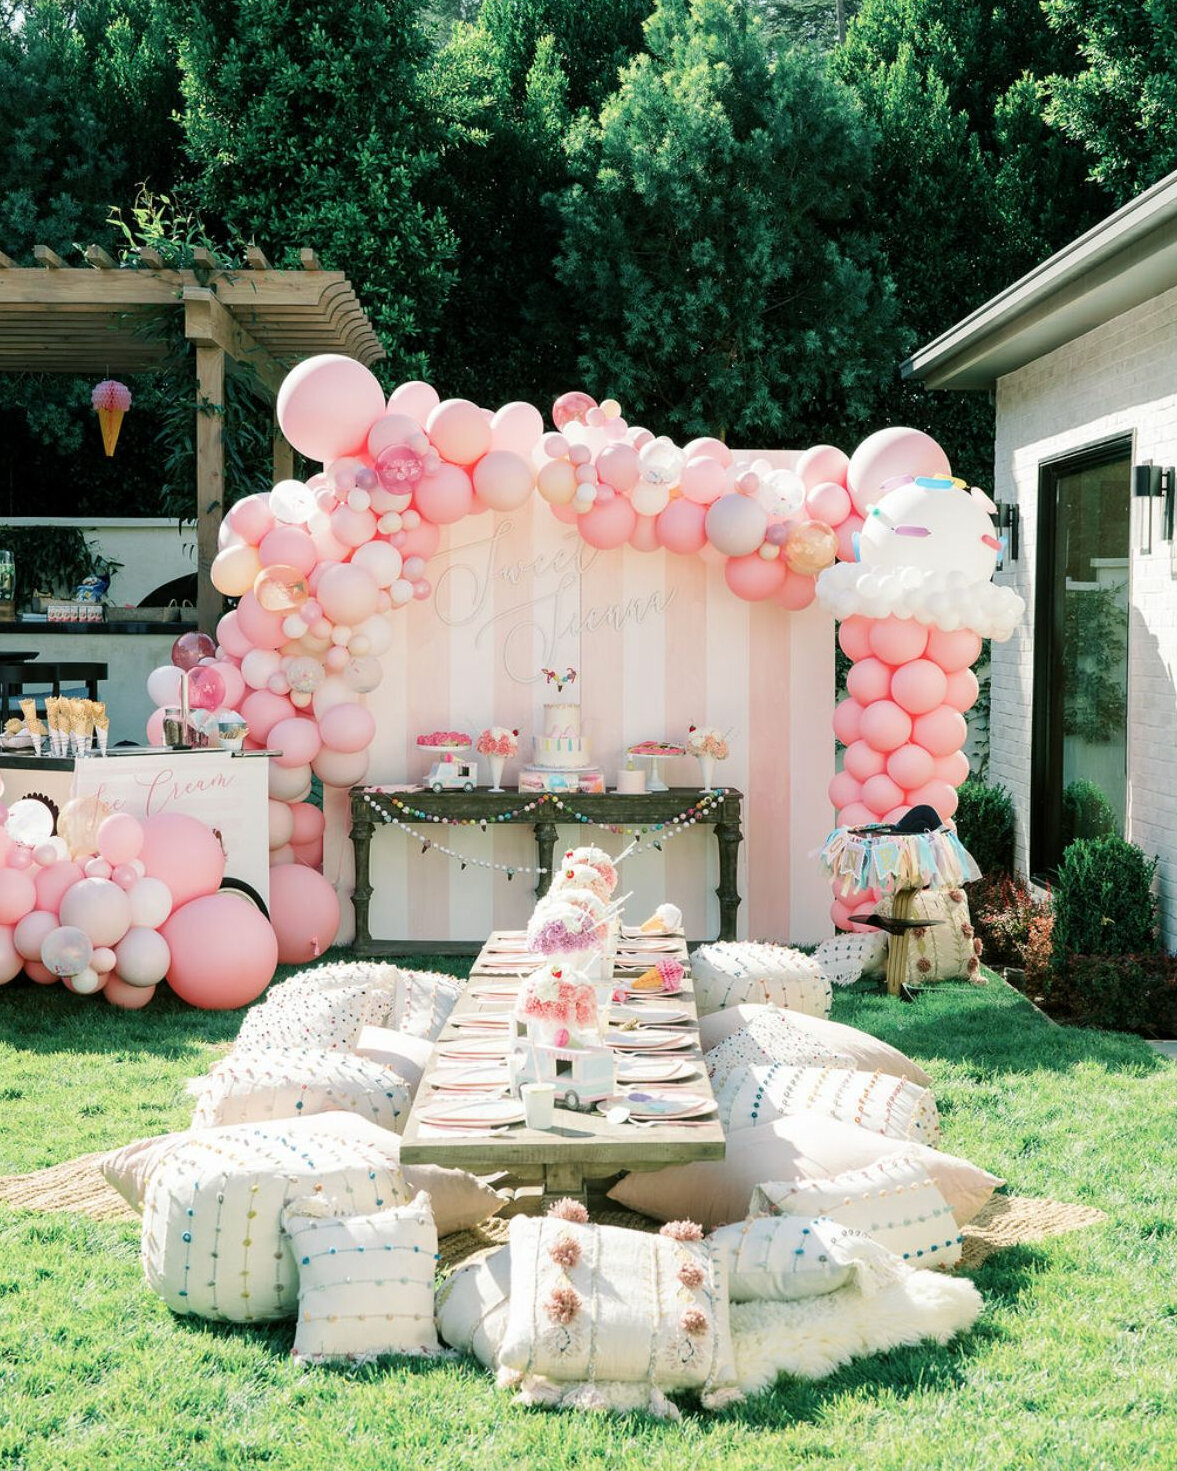 CLIENT PRESS // This sweet-as-ice-cream first birthday from @agoodaffair is on @perfete today, and the details are just plain melt-worthy! 🍦⁣
⁣
Visit the link in our bio for the full f&ecirc;te!⁣
⁣
(Design &amp; Planning by @agoodaffair, Desserts by @fantasyfrostings, Photography by @amygoldingphoto, Rentals by @foundrentalco)⁣
⁣
https://perfete.com/2021/04/ice-cream-first-birthday-party.html